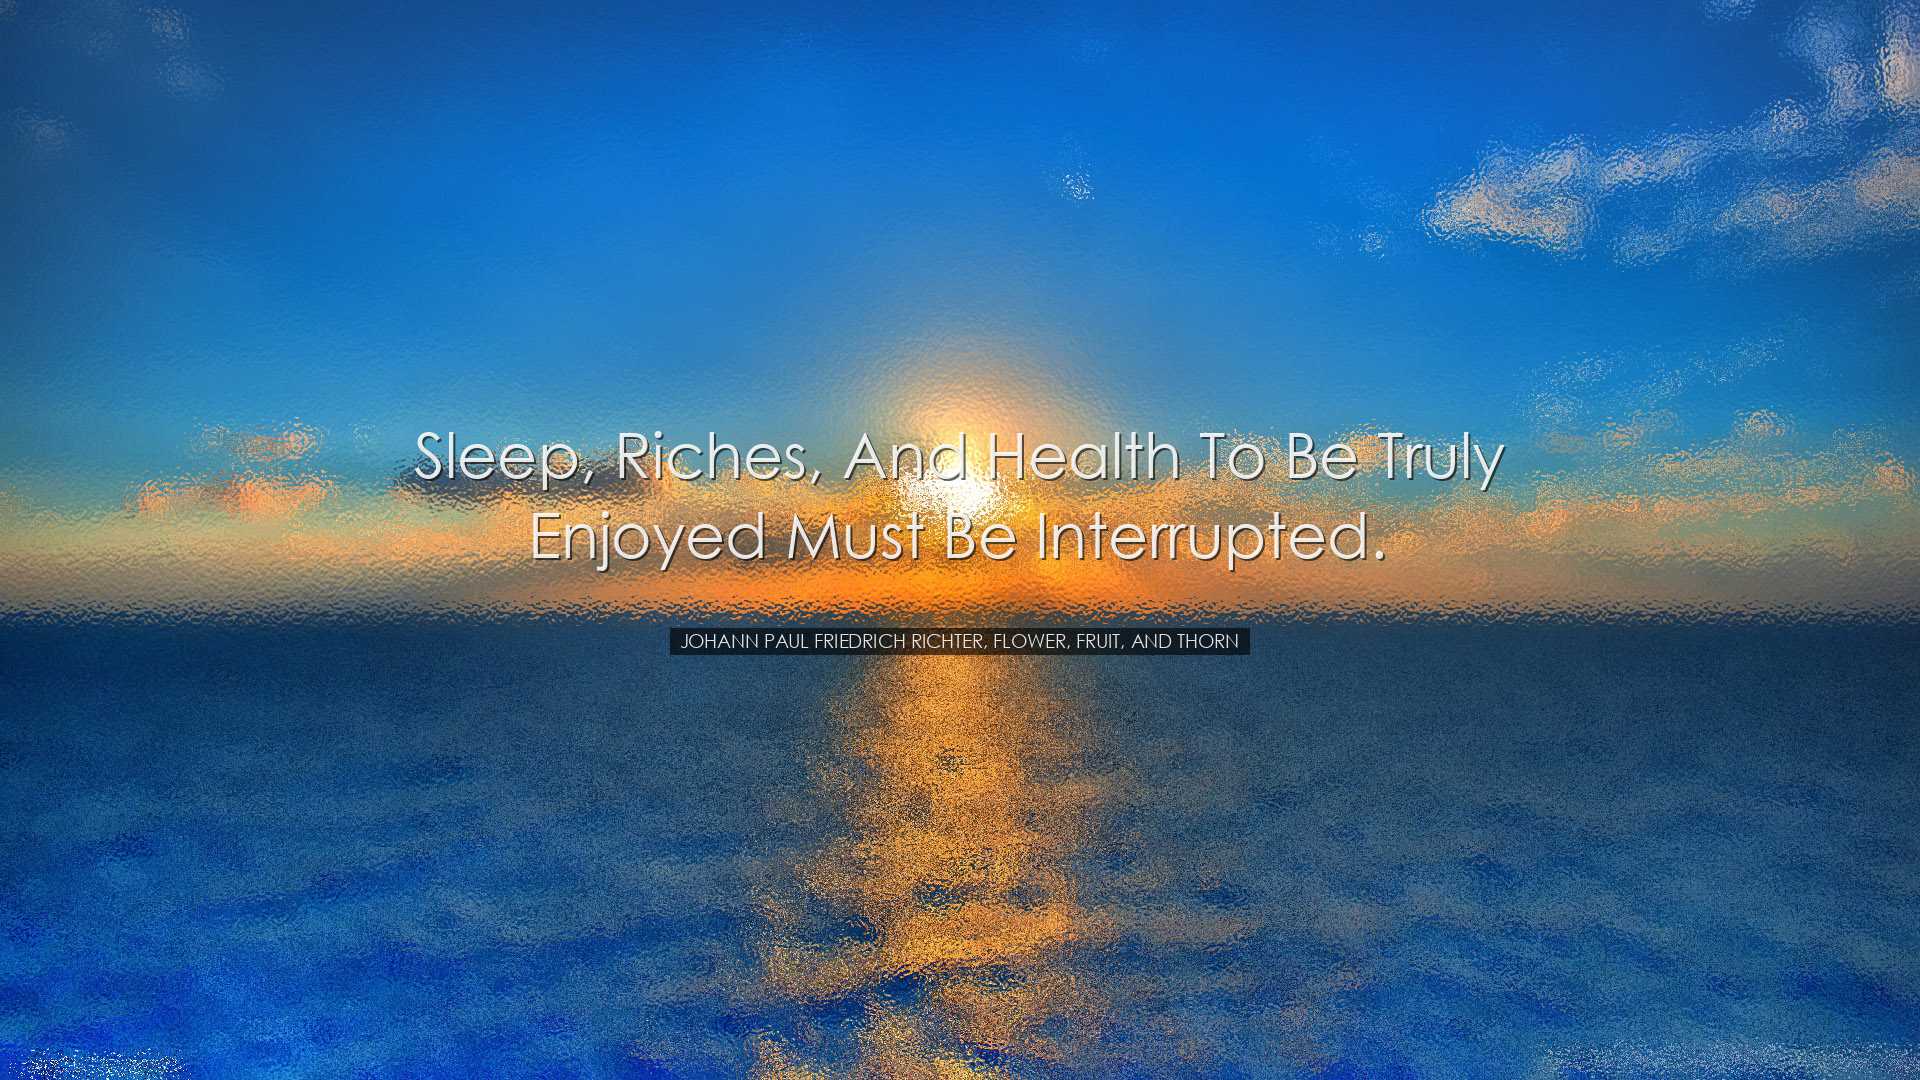 Sleep, riches, and health to be truly enjoyed must be interrupted.